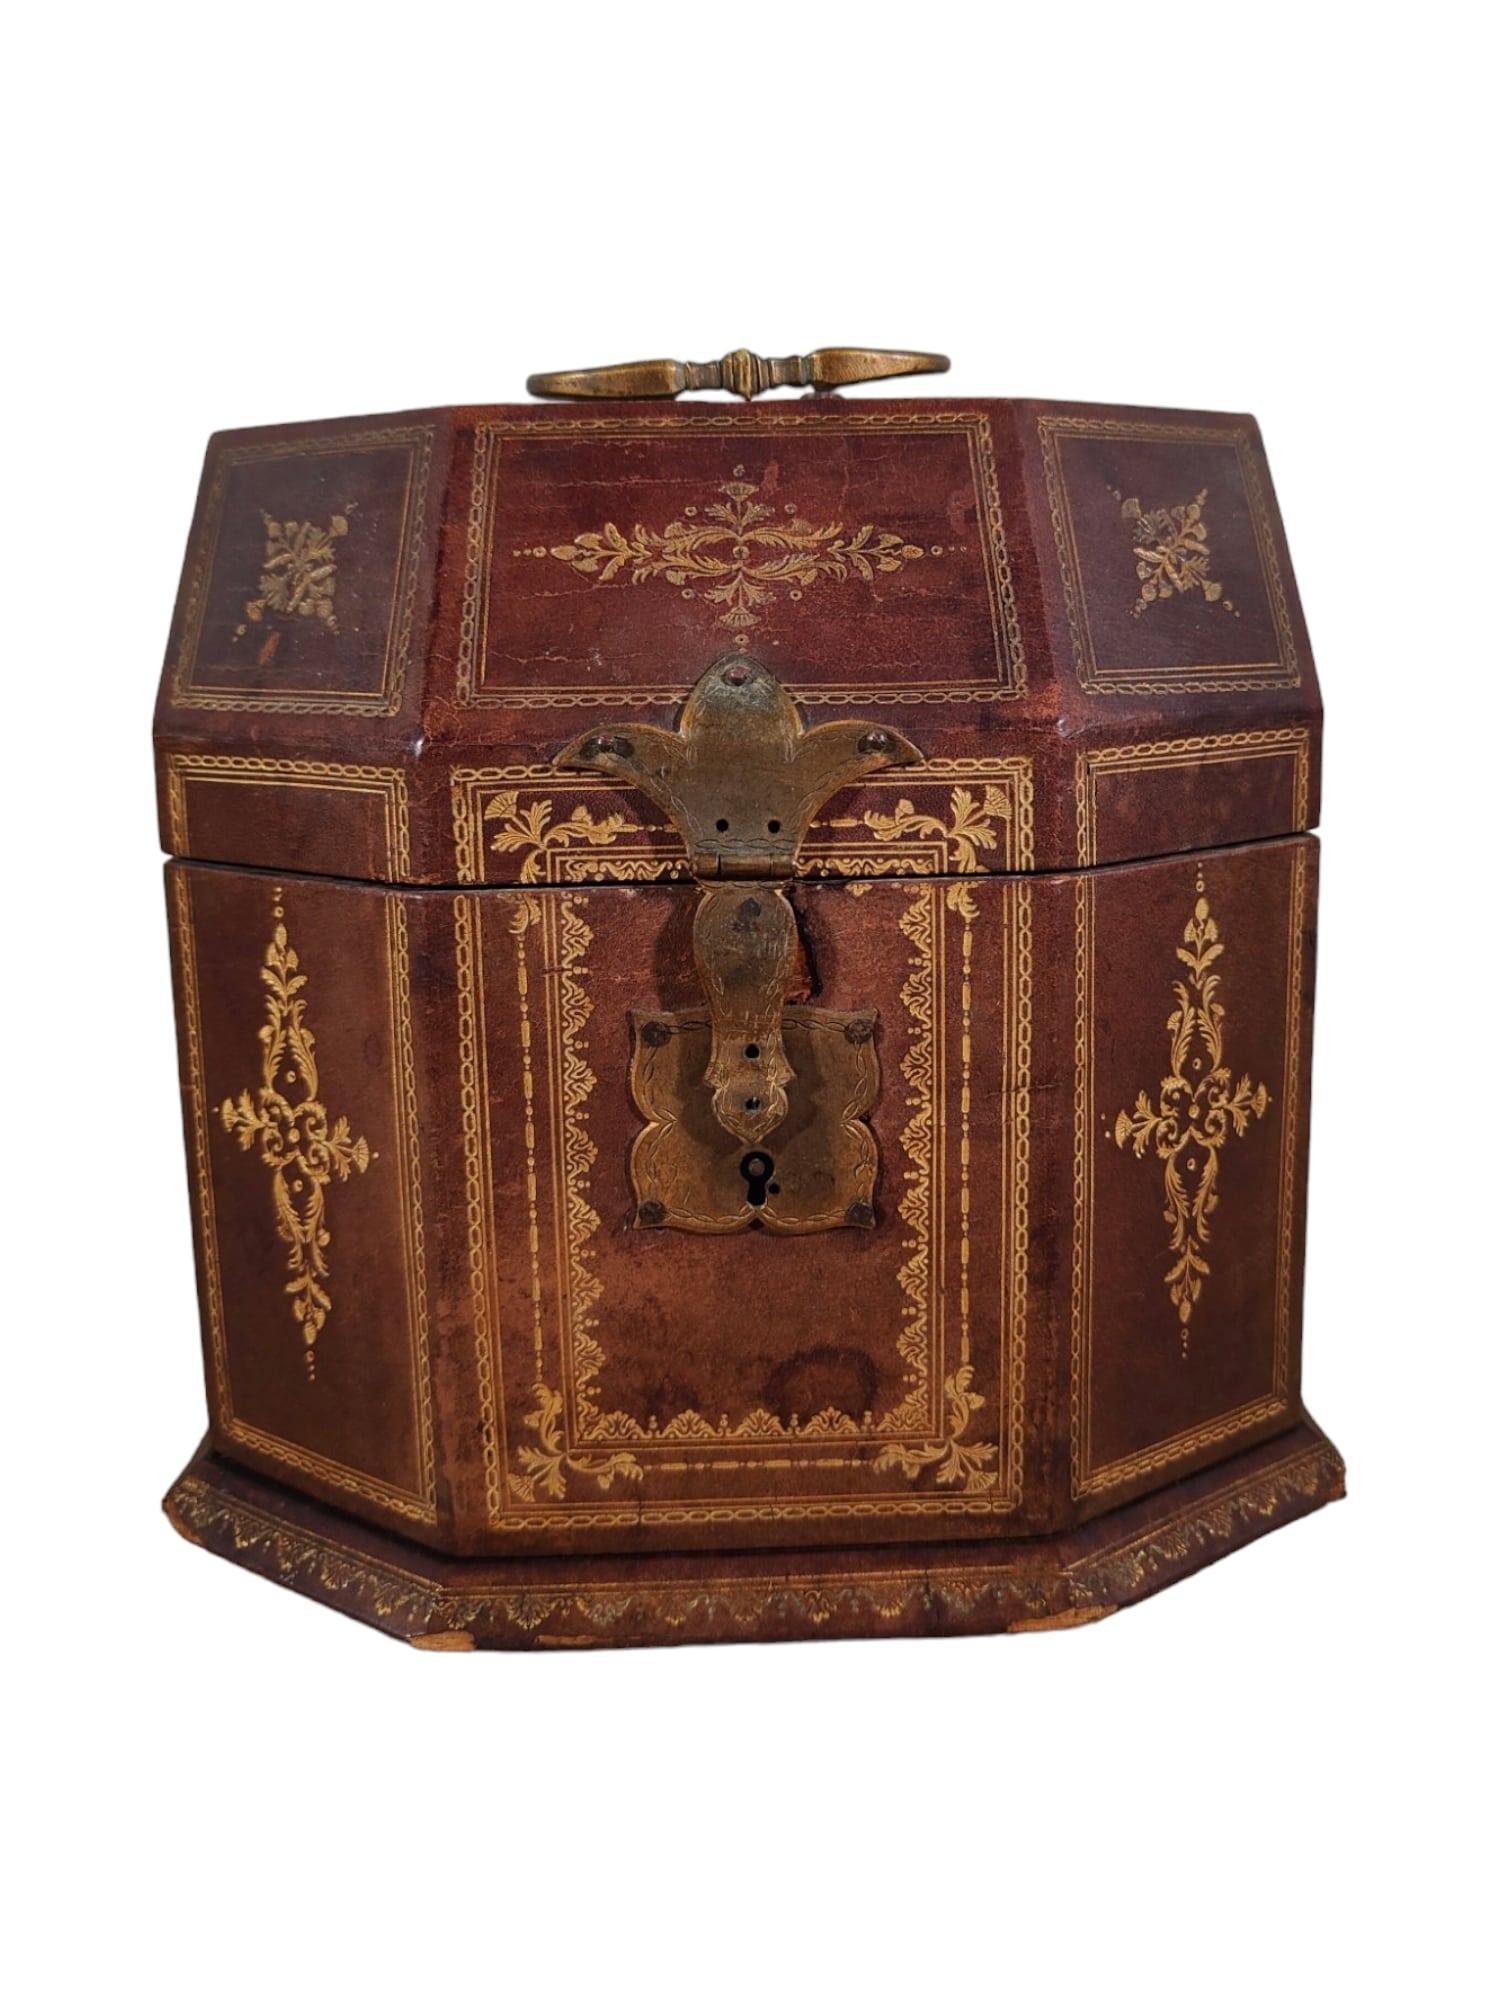 Type: Leather Box
Origin: France
Era: 18th Century
Material: Embossed and Engraved Leather with Gilded Trims
Dimensions: 20 x 12 x 8 cm
Features and Details:
This elegant 18th-century leather box is a magnificent example of French craftsmanship from